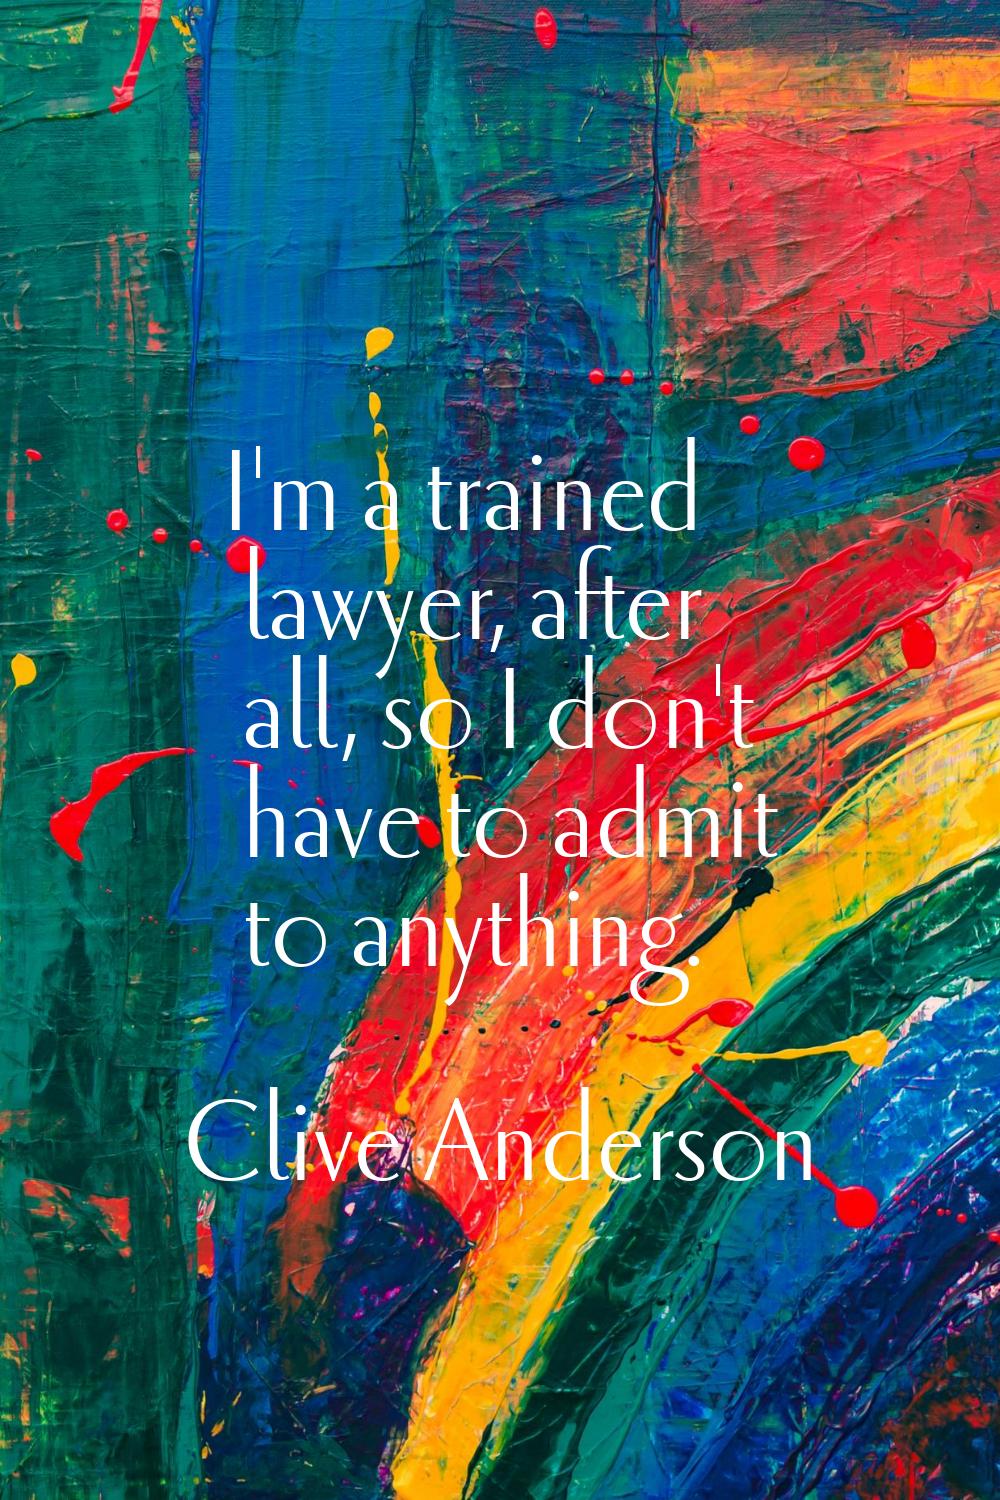 I'm a trained lawyer, after all, so I don't have to admit to anything.